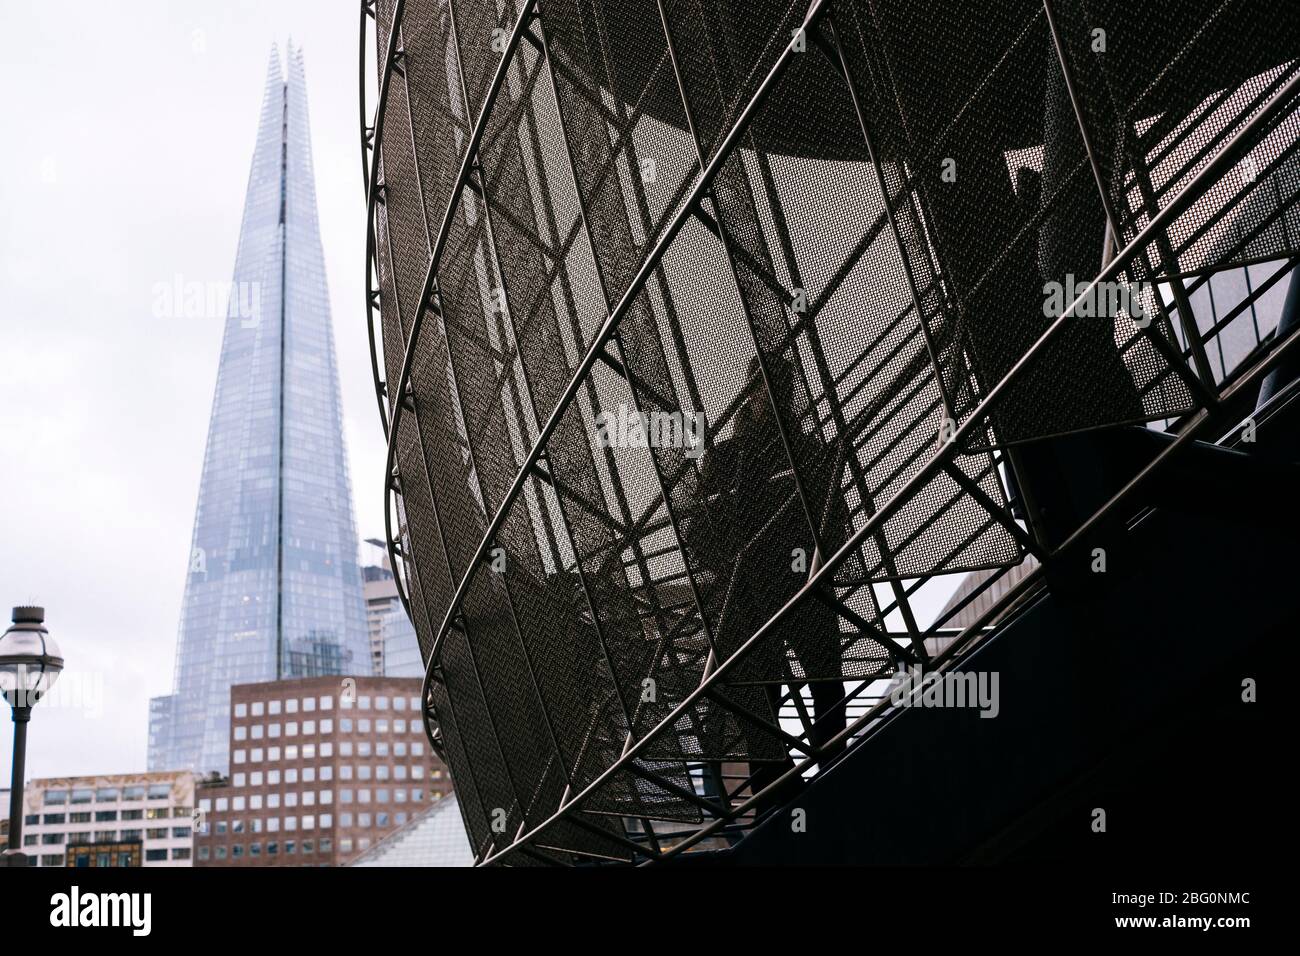 London Bridge pedestrian walkway with the Shard in the background, on a dull winters day Stock Photo